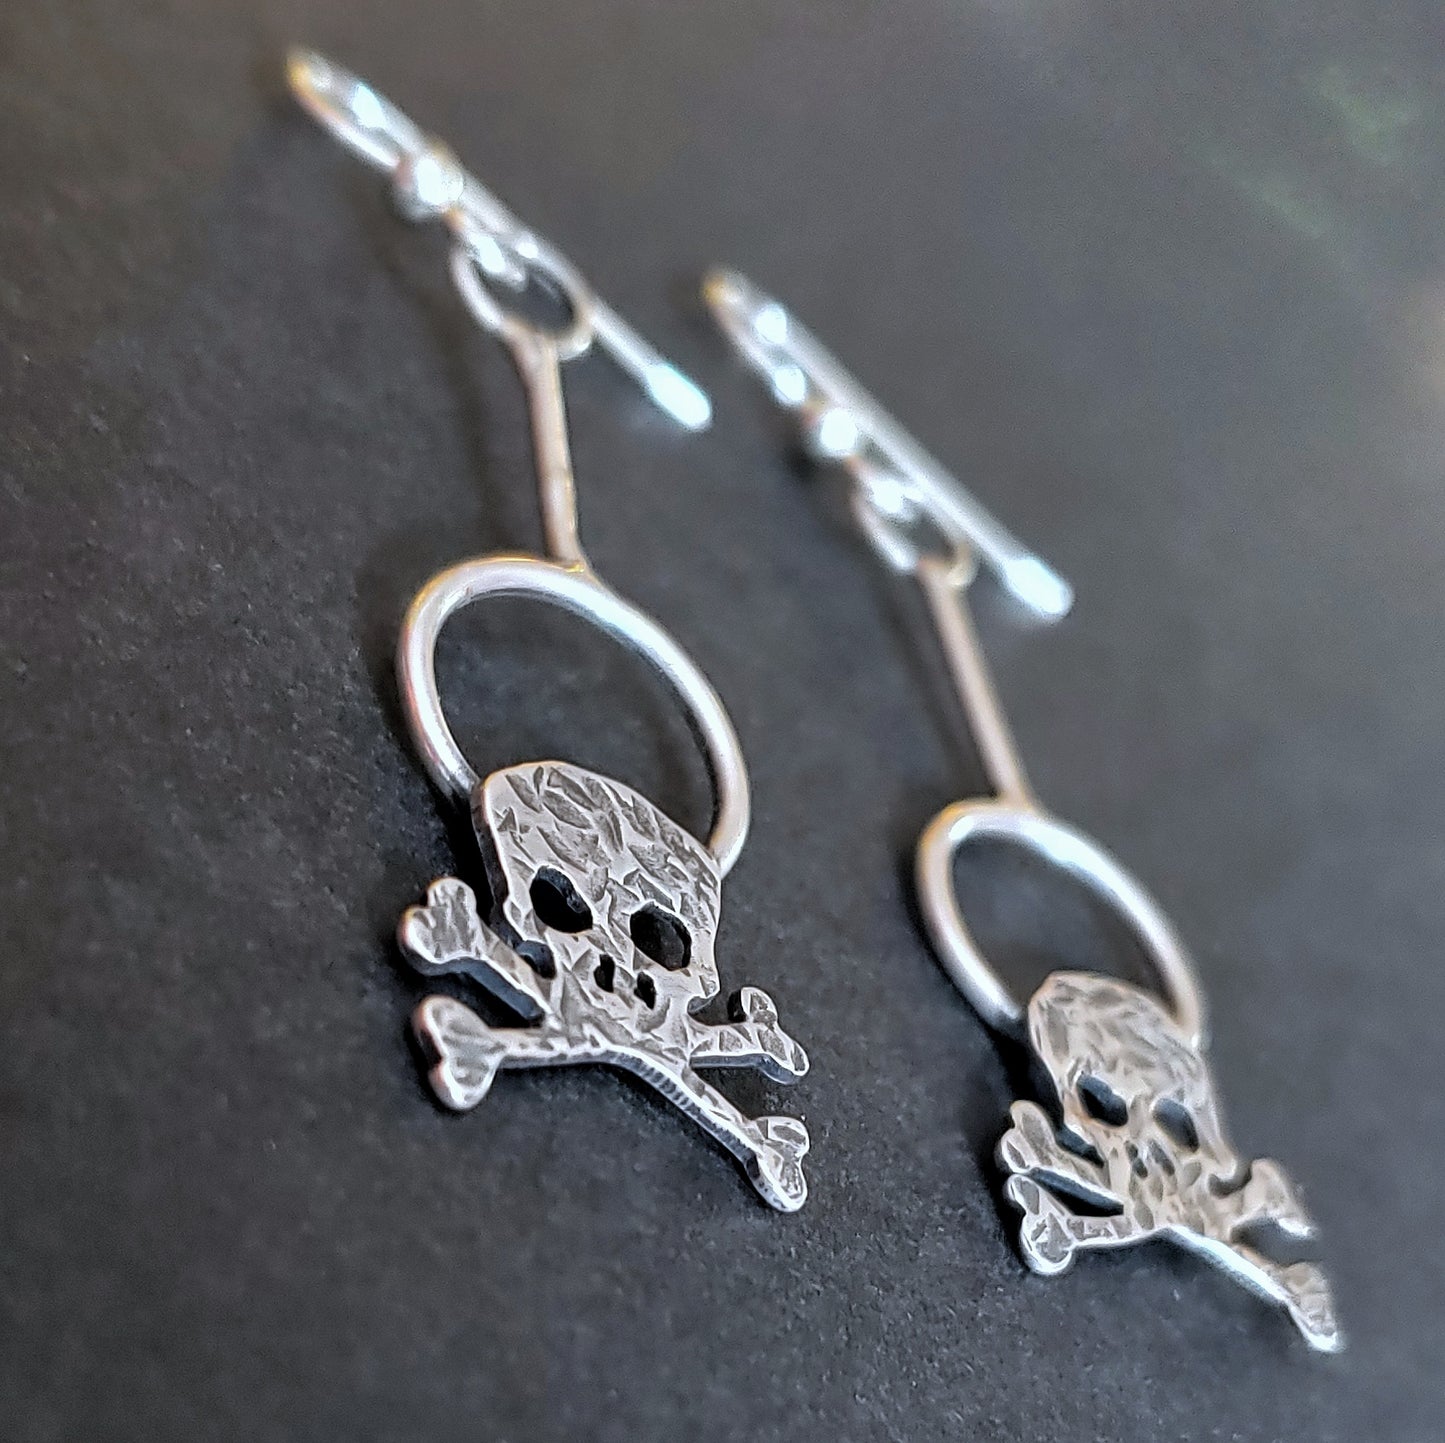 Close up view of the hammered sterling silver skull earrings on a black background.